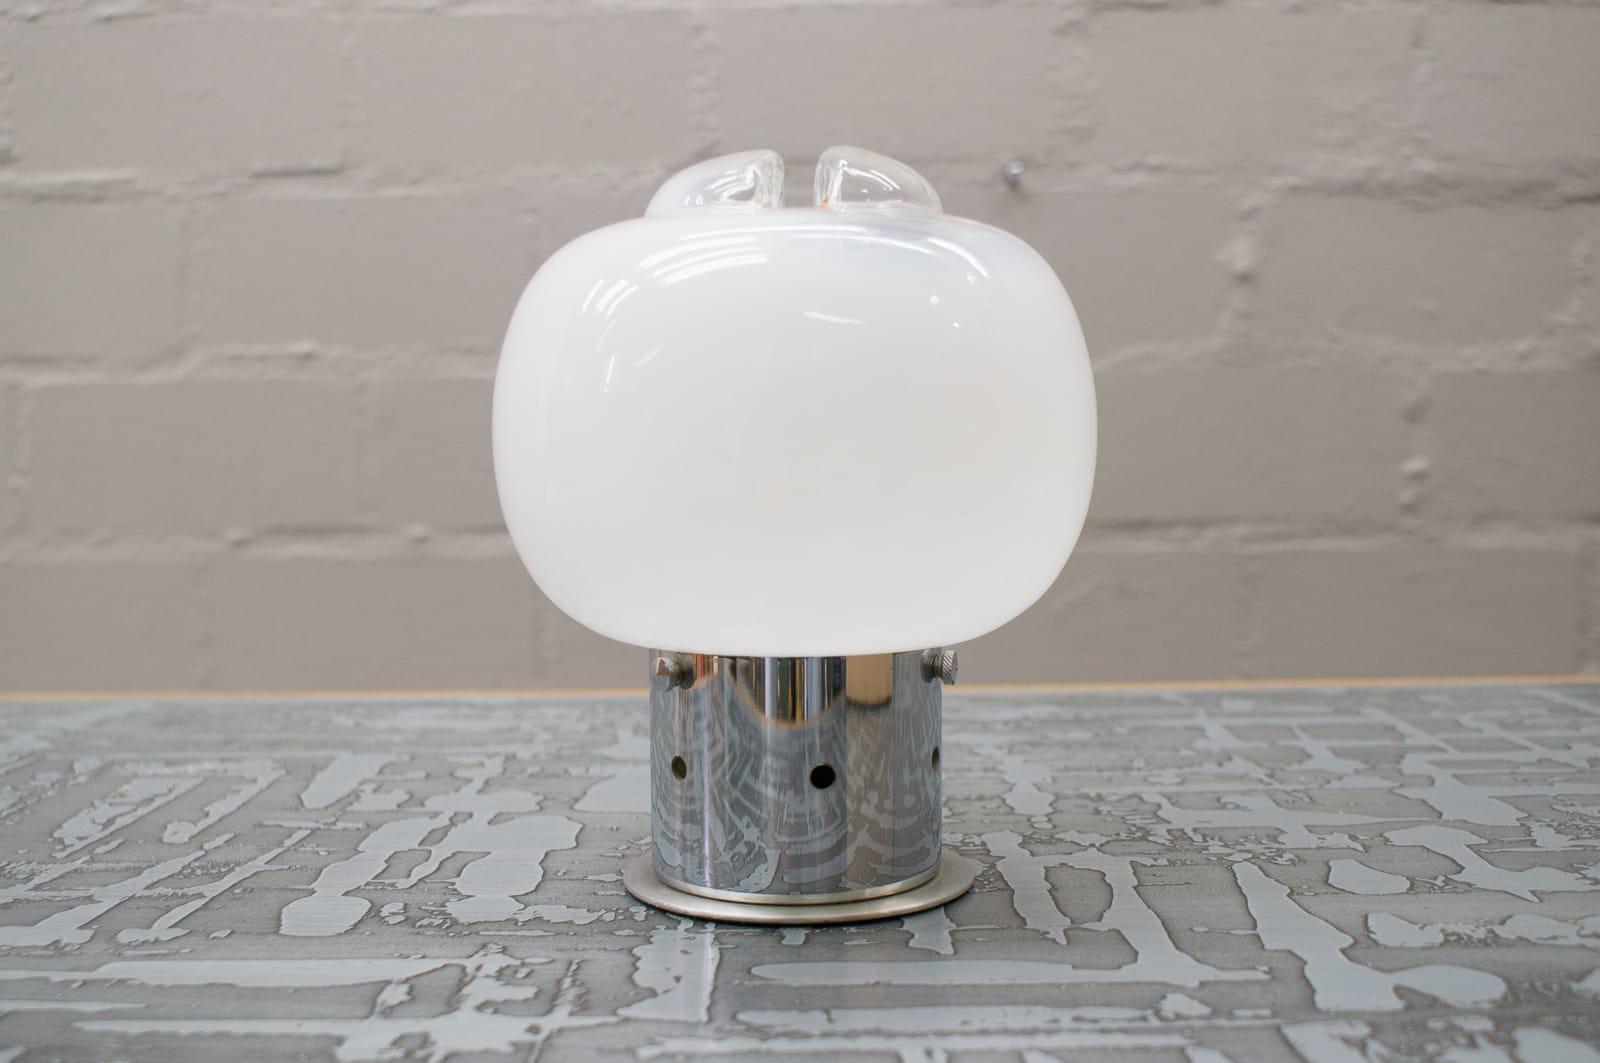 Rare Complete Set of Mazzega Lamps, Floor, Table, Wall and Ceiling Lamp, 1960s For Sale 4